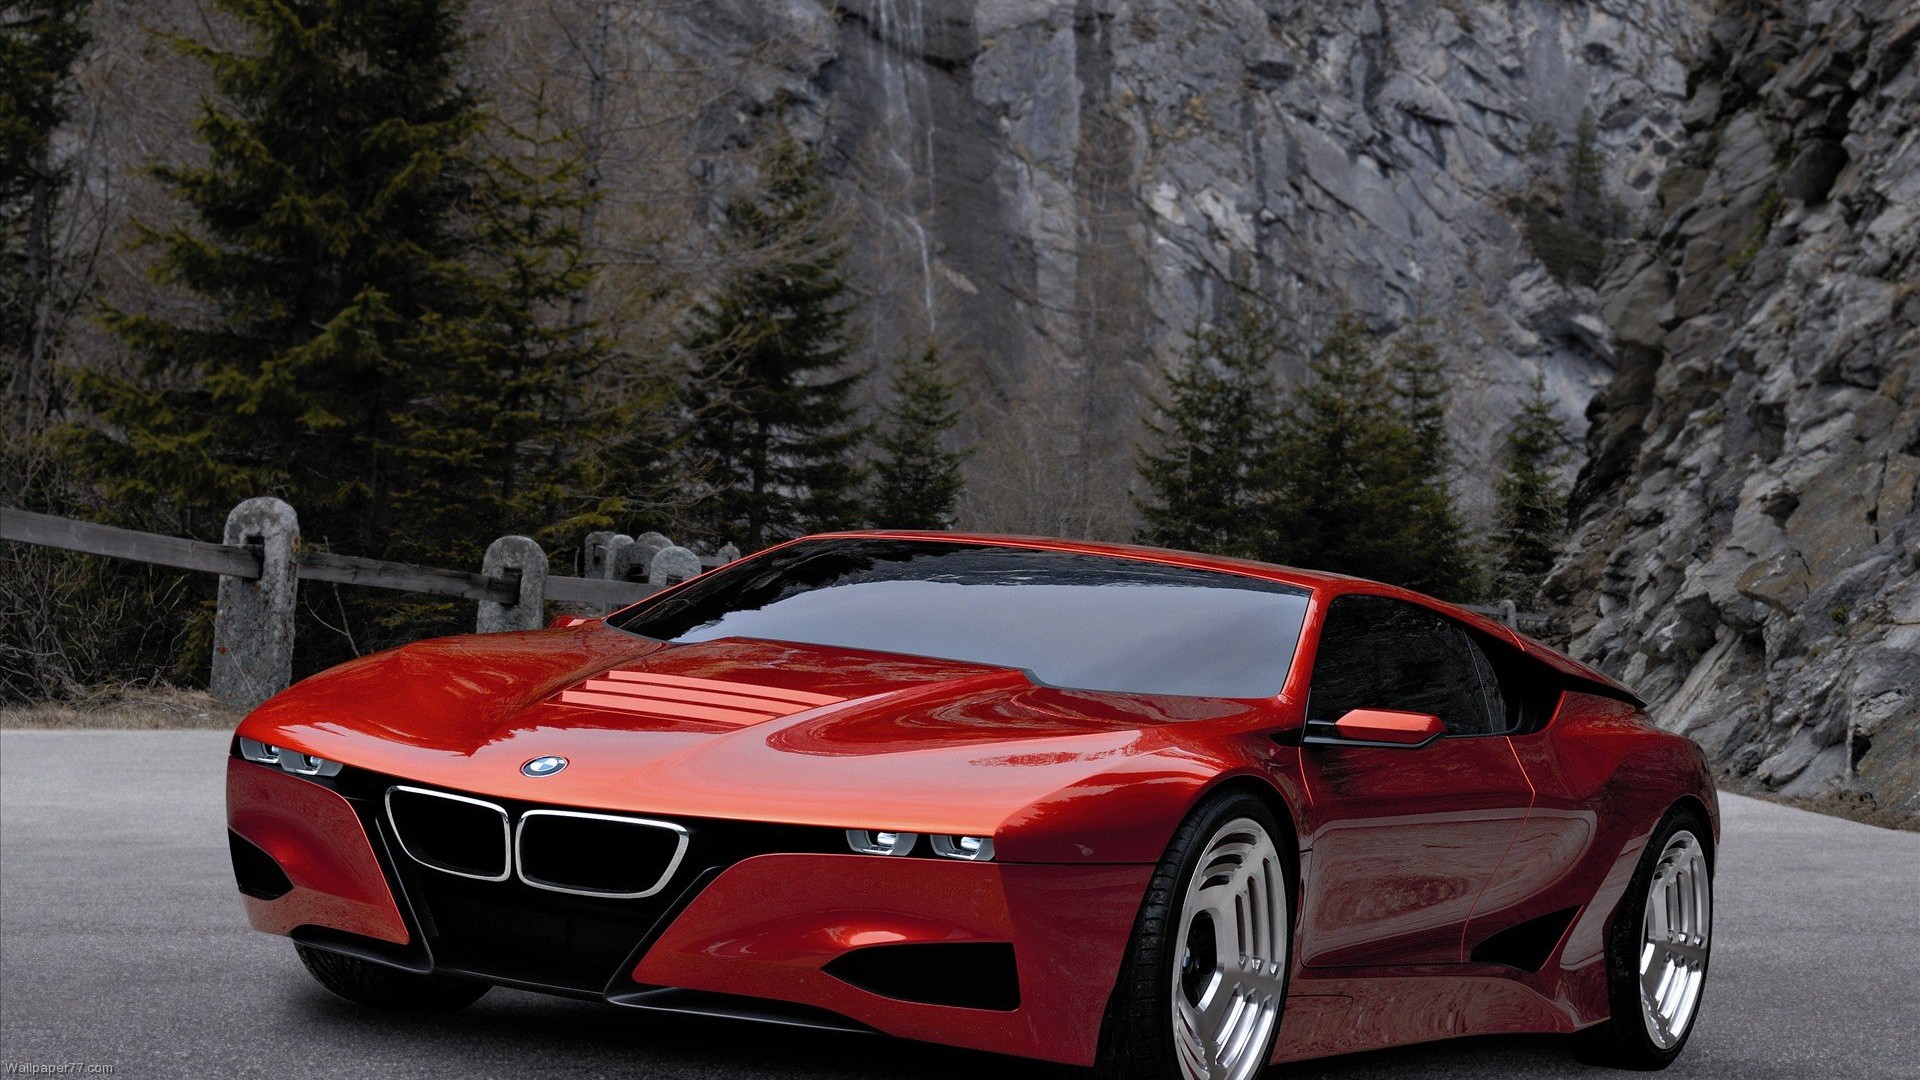 1920x1080 pixels Wallpapers tagged BMW Wallpapers Car Wallpapers